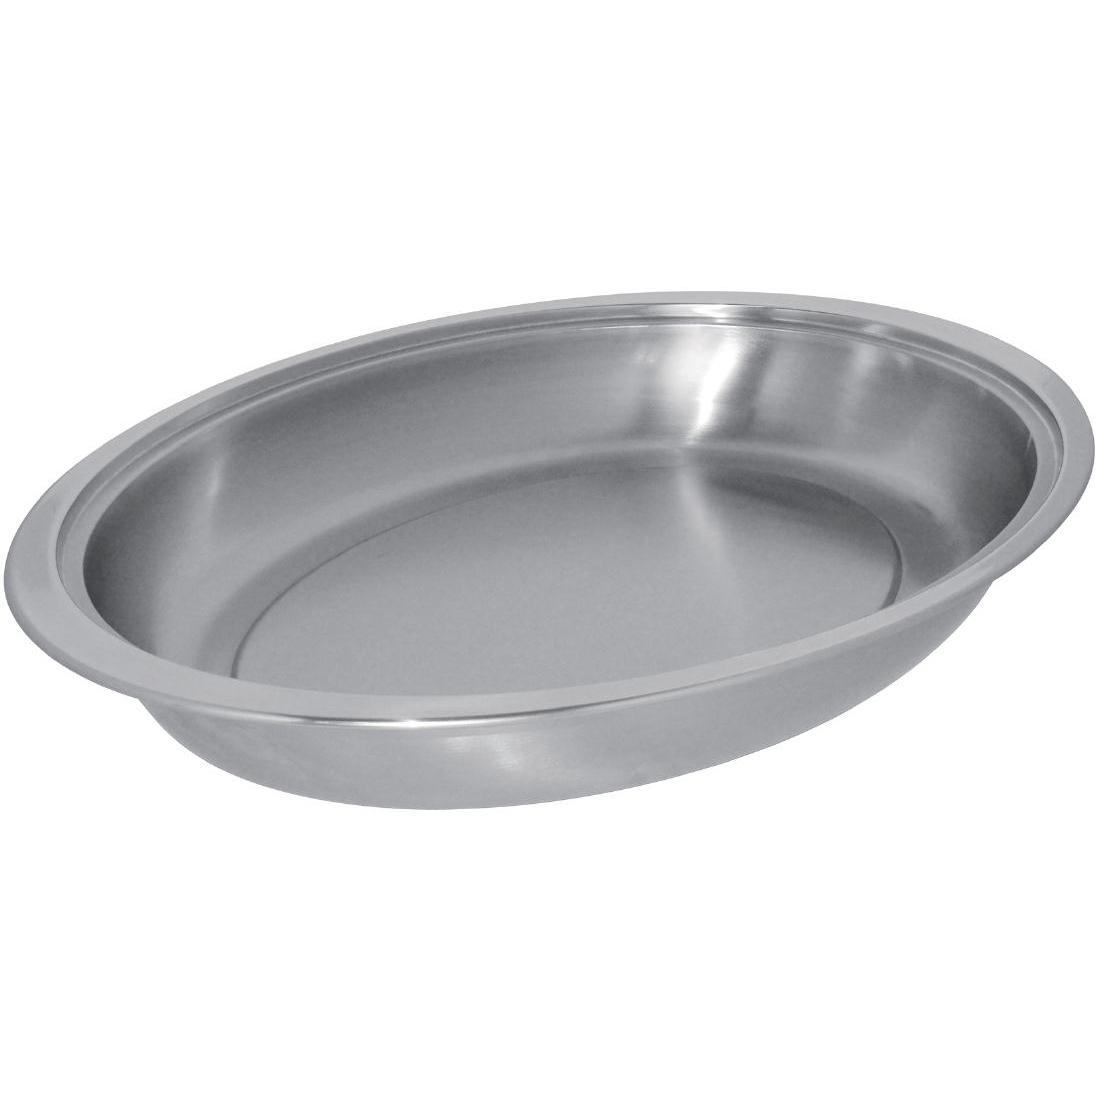 Serving Dish Stainless Steel Oval 7.5Ltr - CB725 - 1